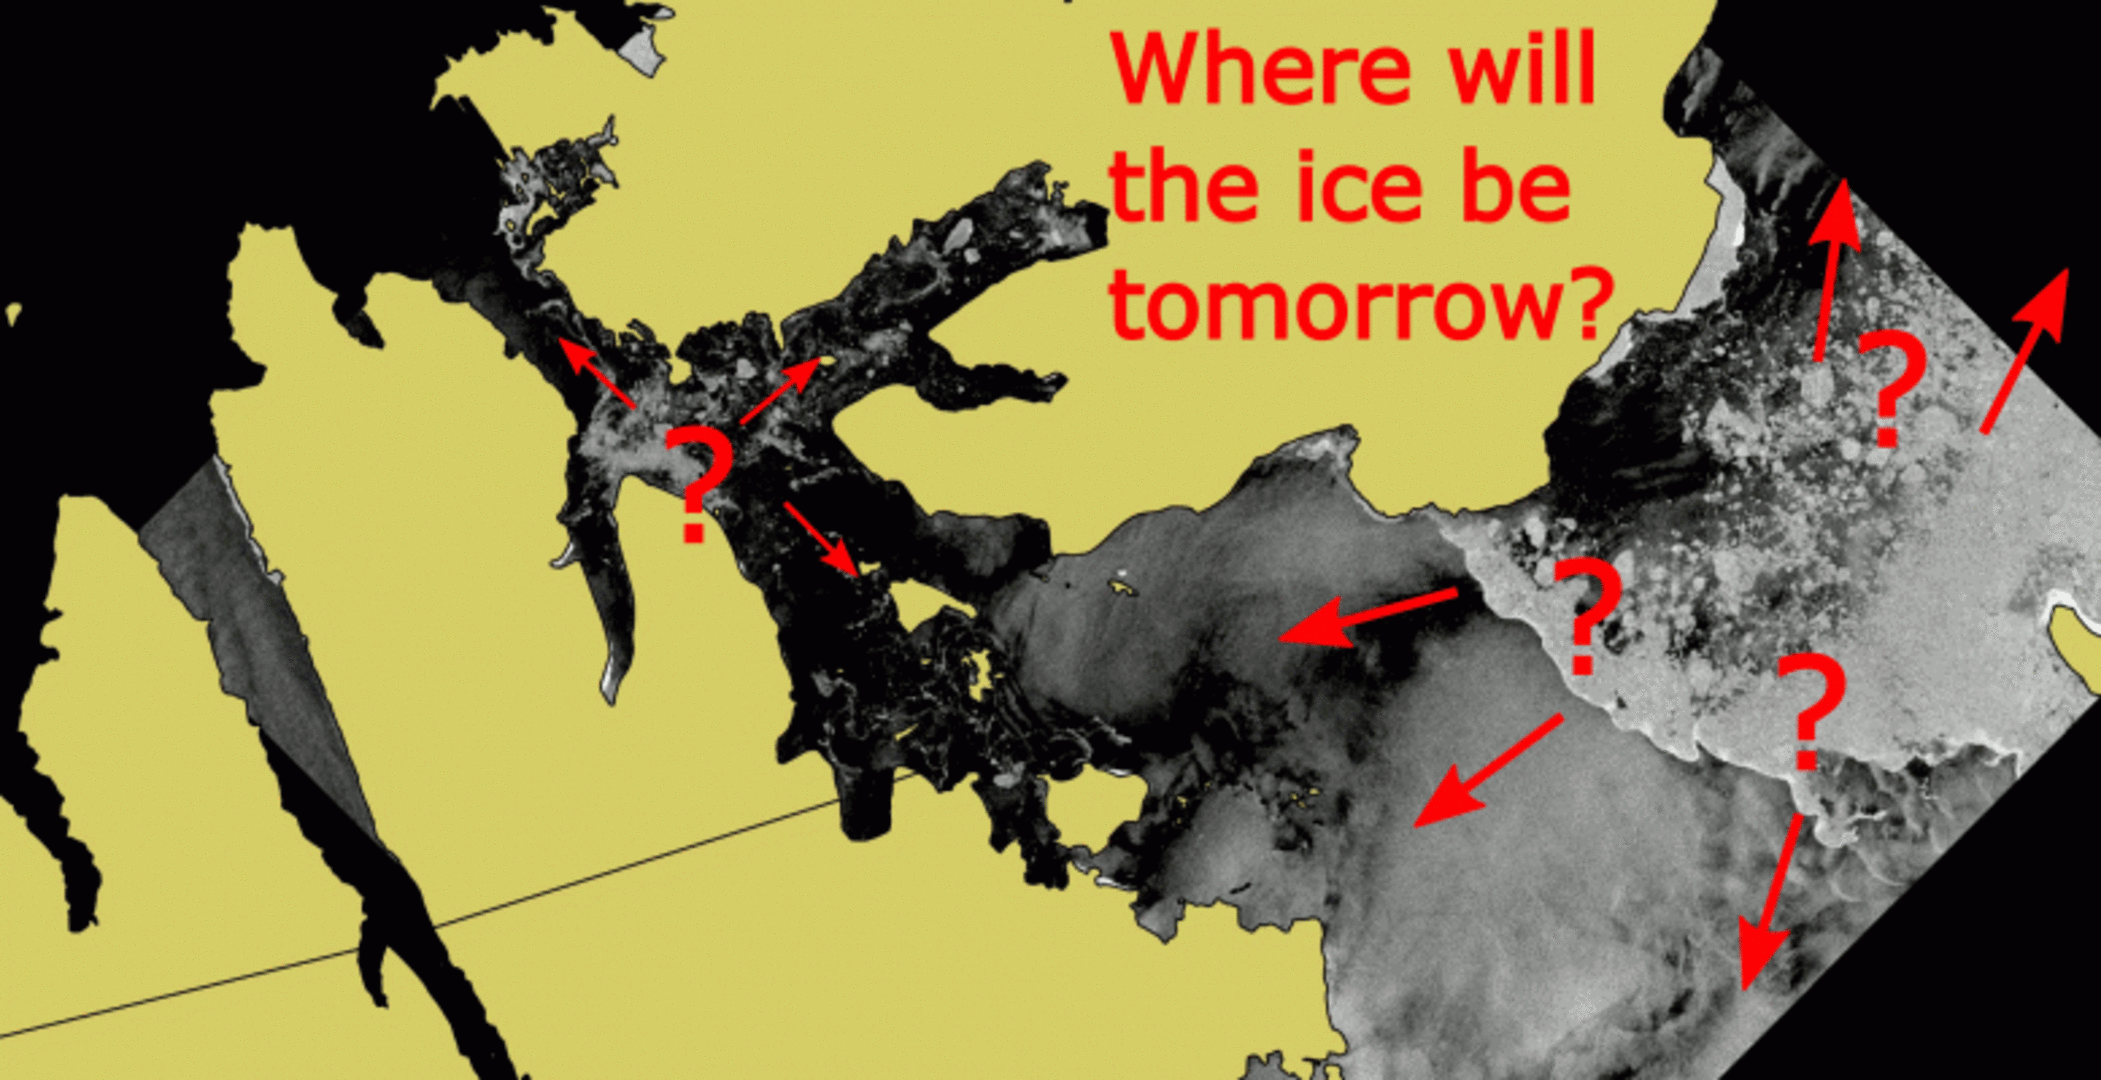 Where will the ice be tomorrow?